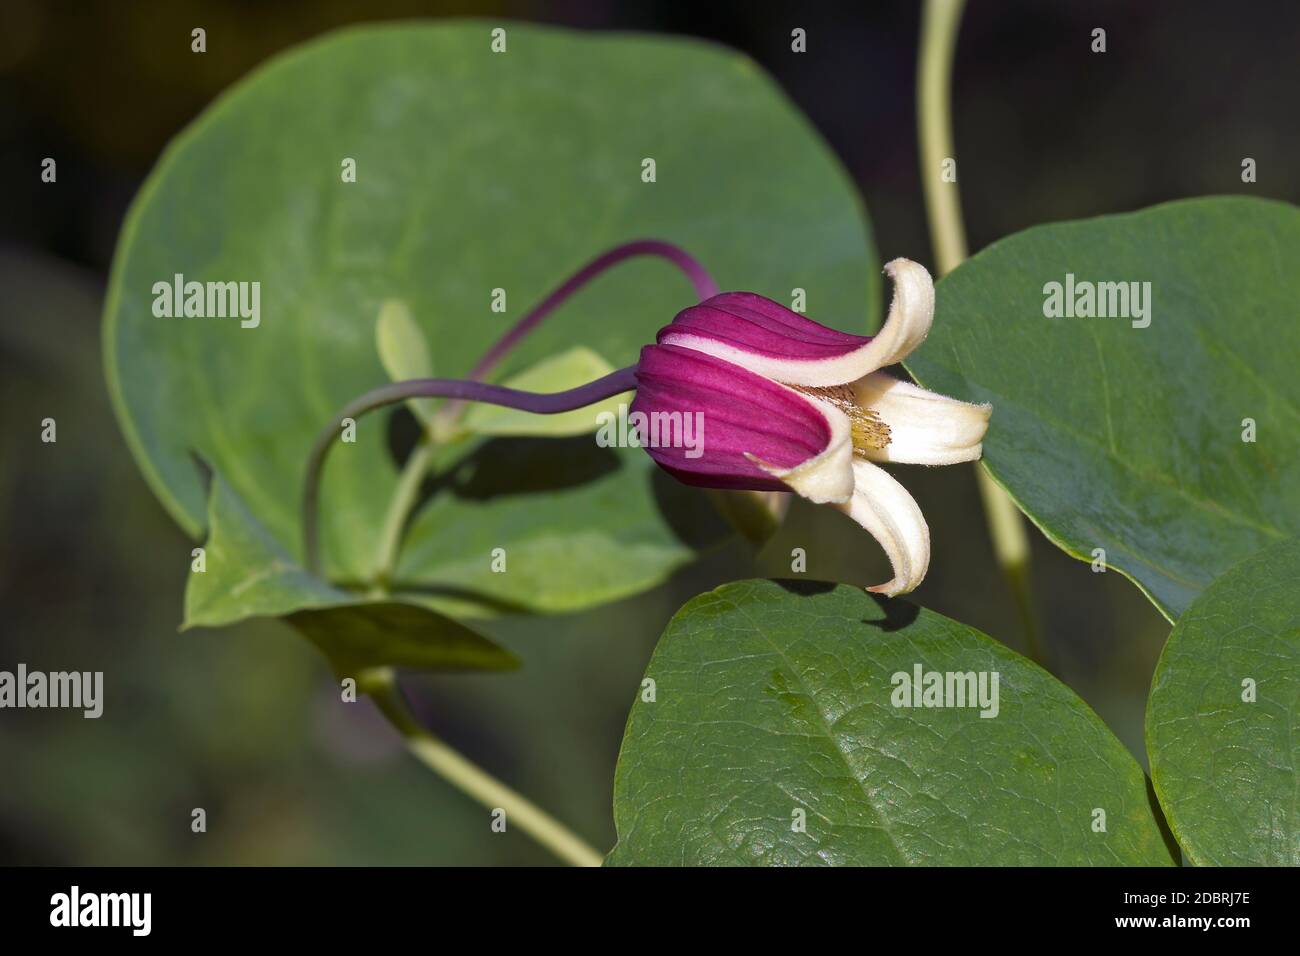 Whiteleaf Leather flower (Clematis glaucophylla) Stock Photo